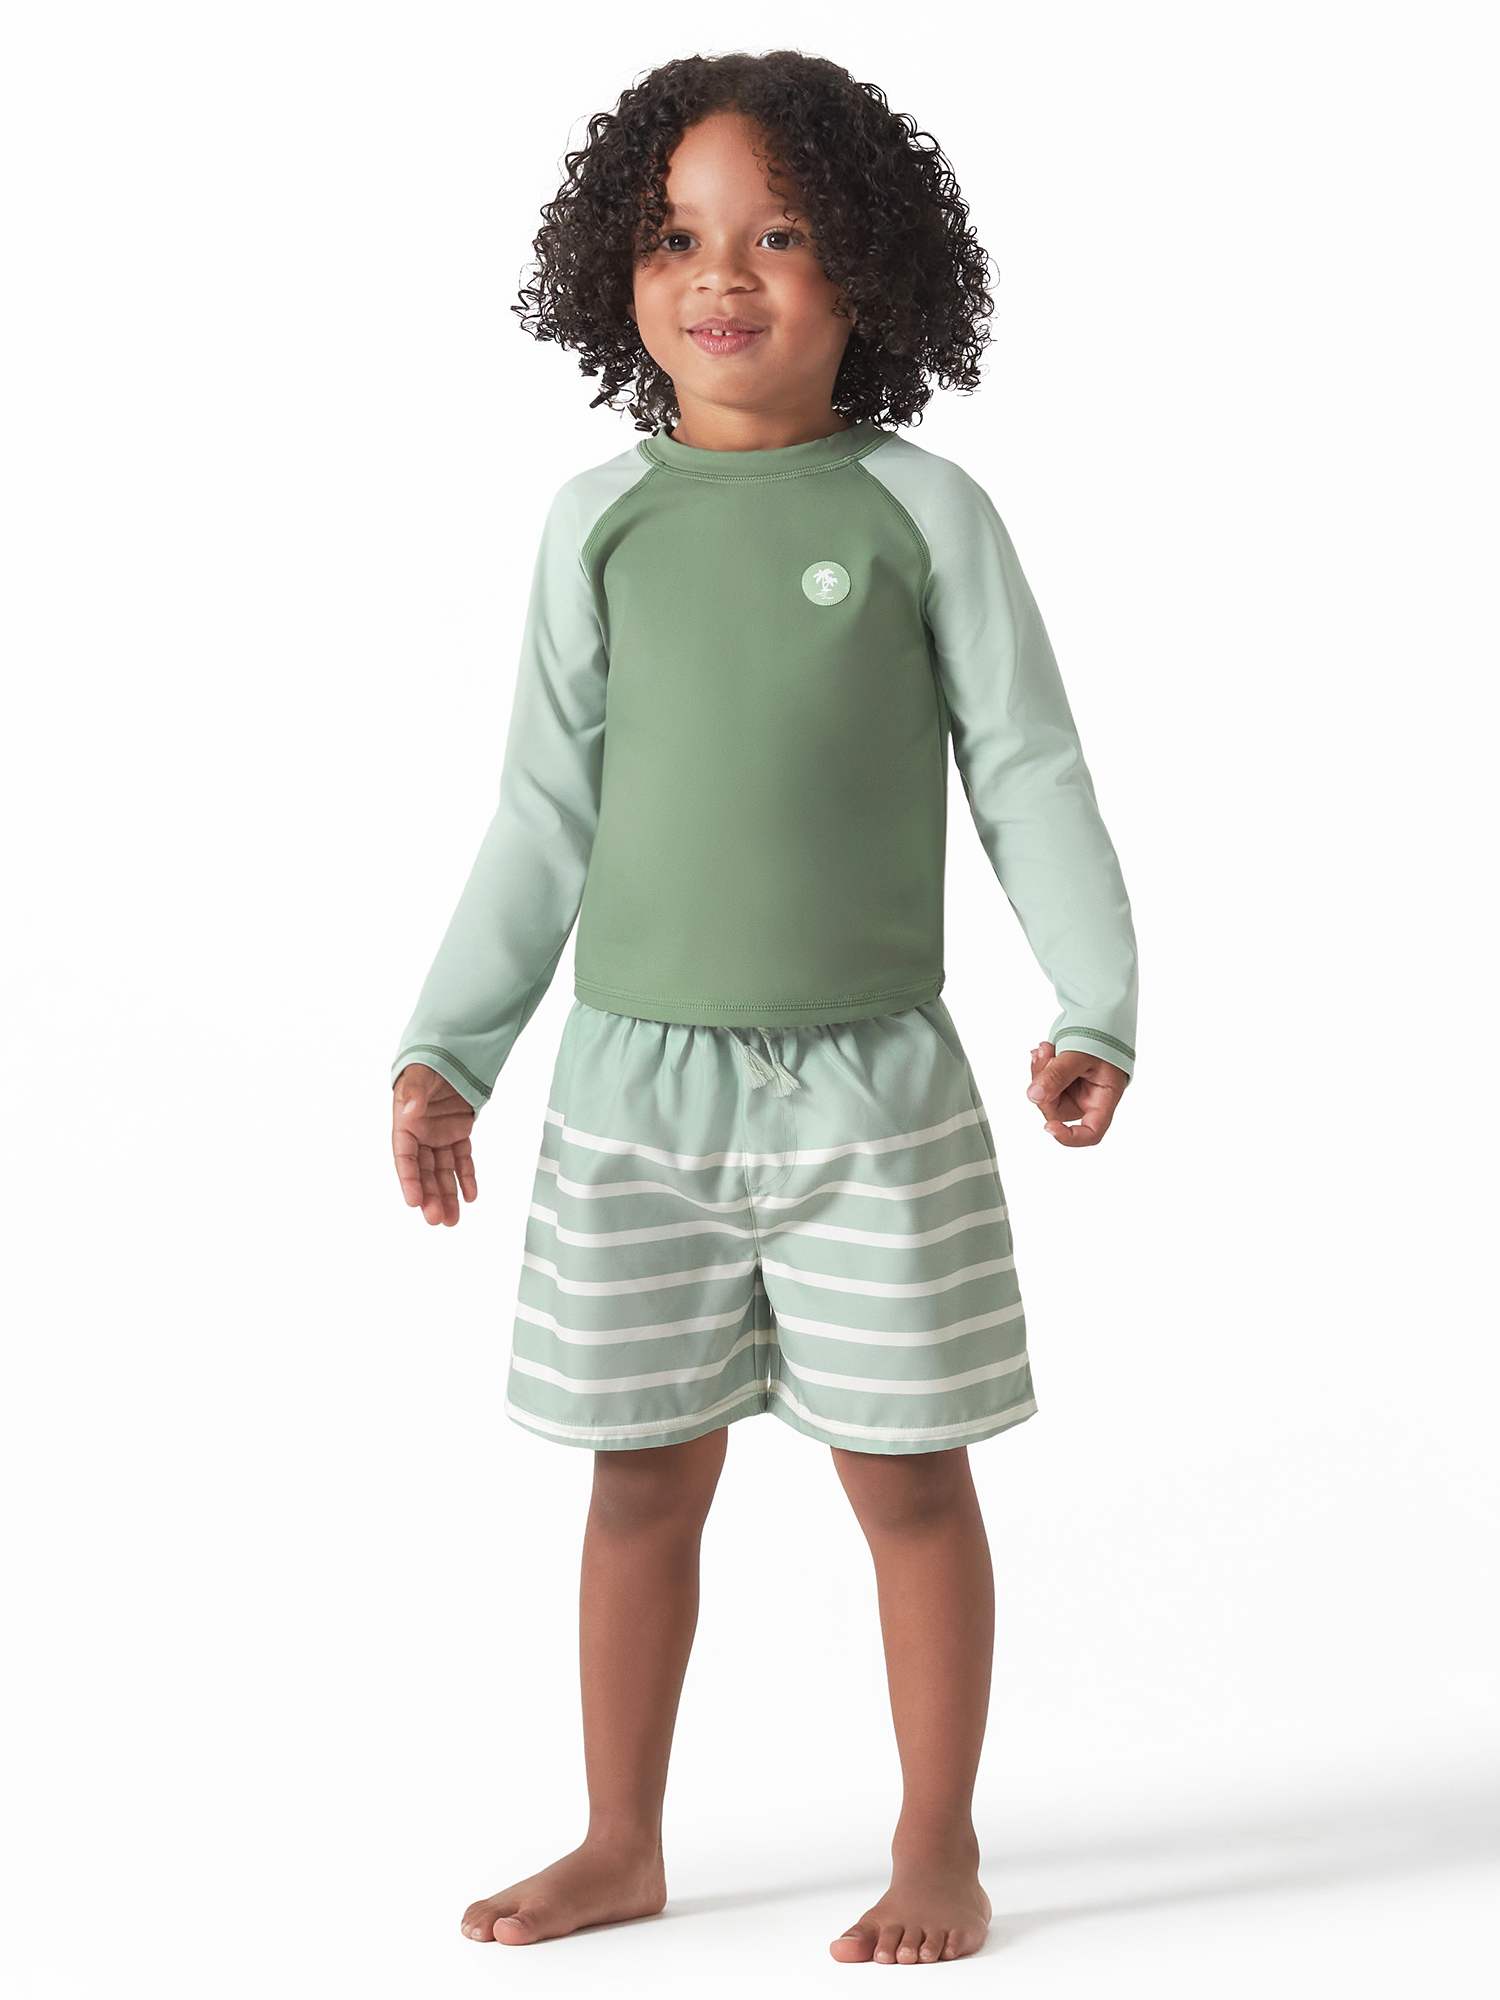 Modern Moments by Gerber Baby and Toddler Boys Long Sleeve Rash Guard and Swim Trunks Set with UPF 50+, 2-Piece, Sizes 12M-5T - image 1 of 12